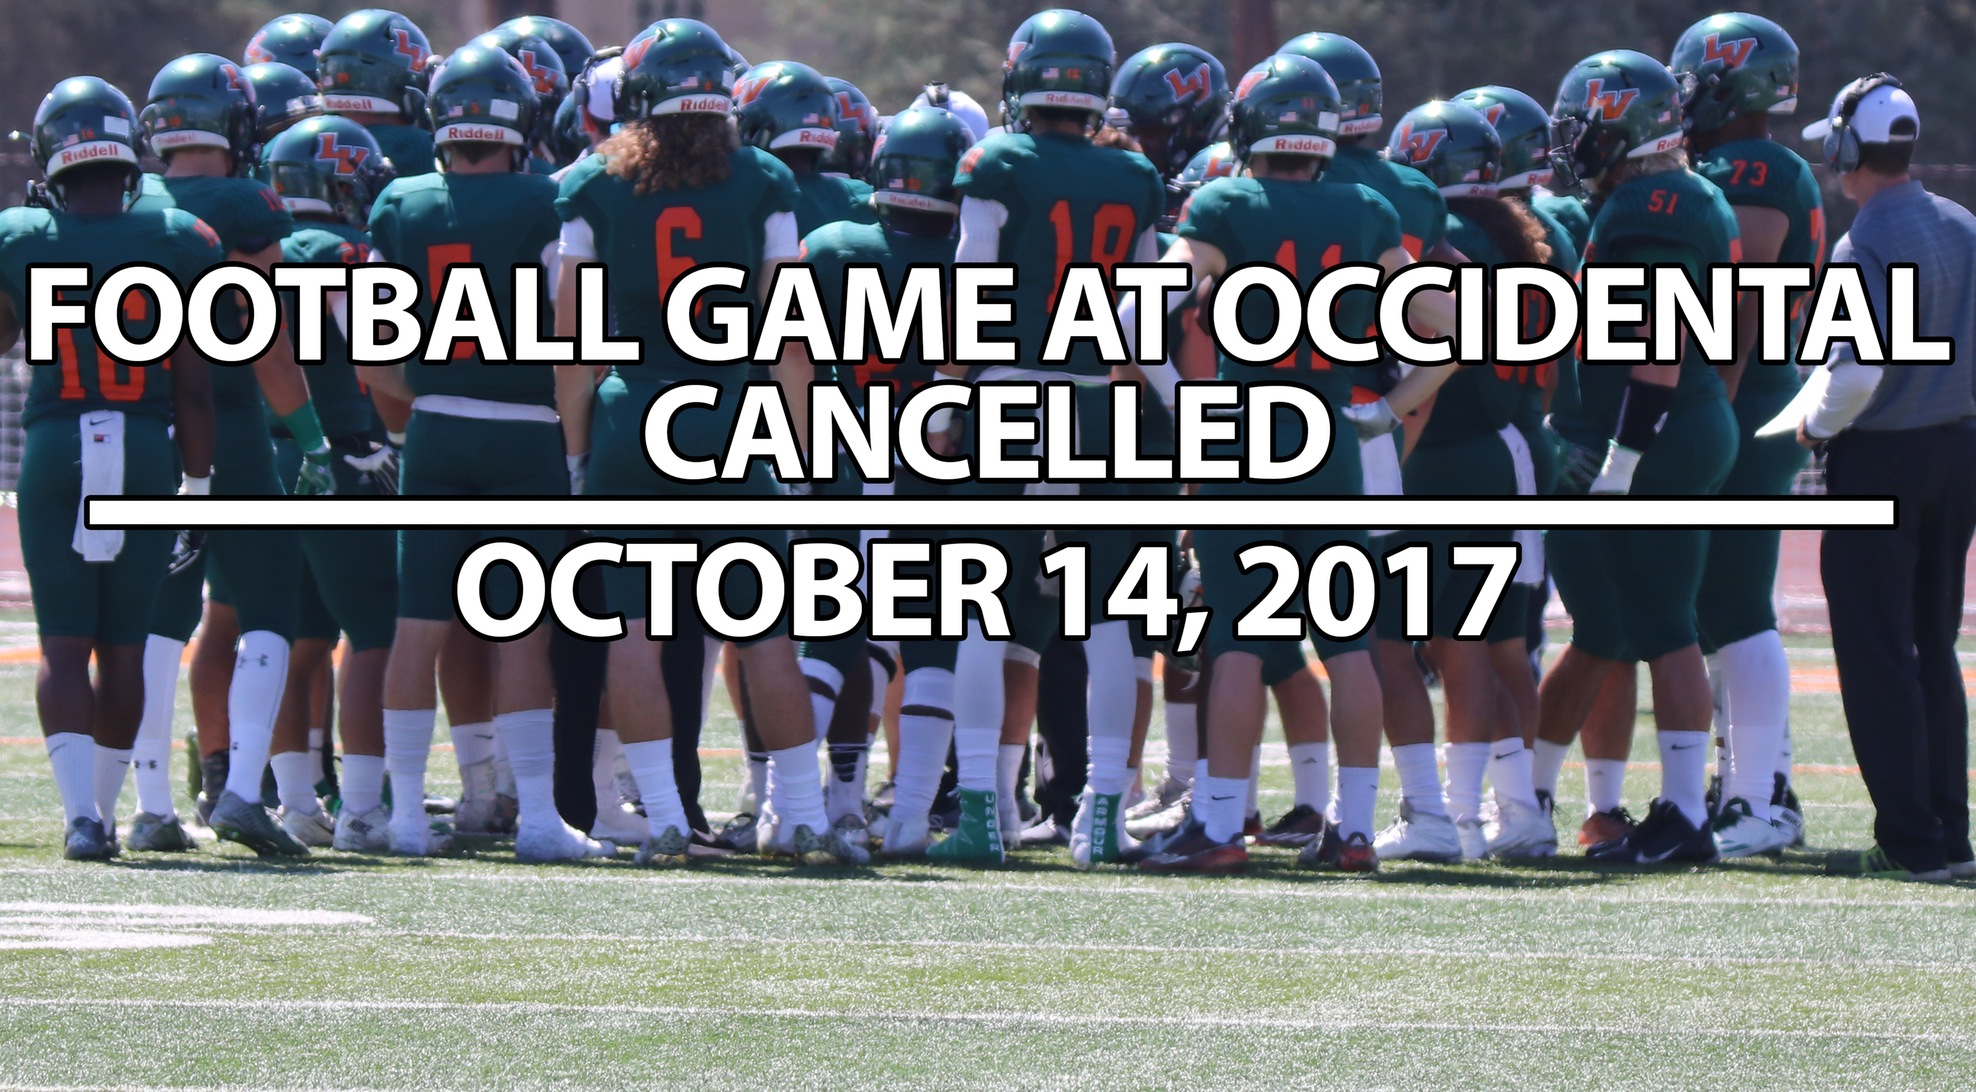 La Verne Football Game at Occidental Cancelled